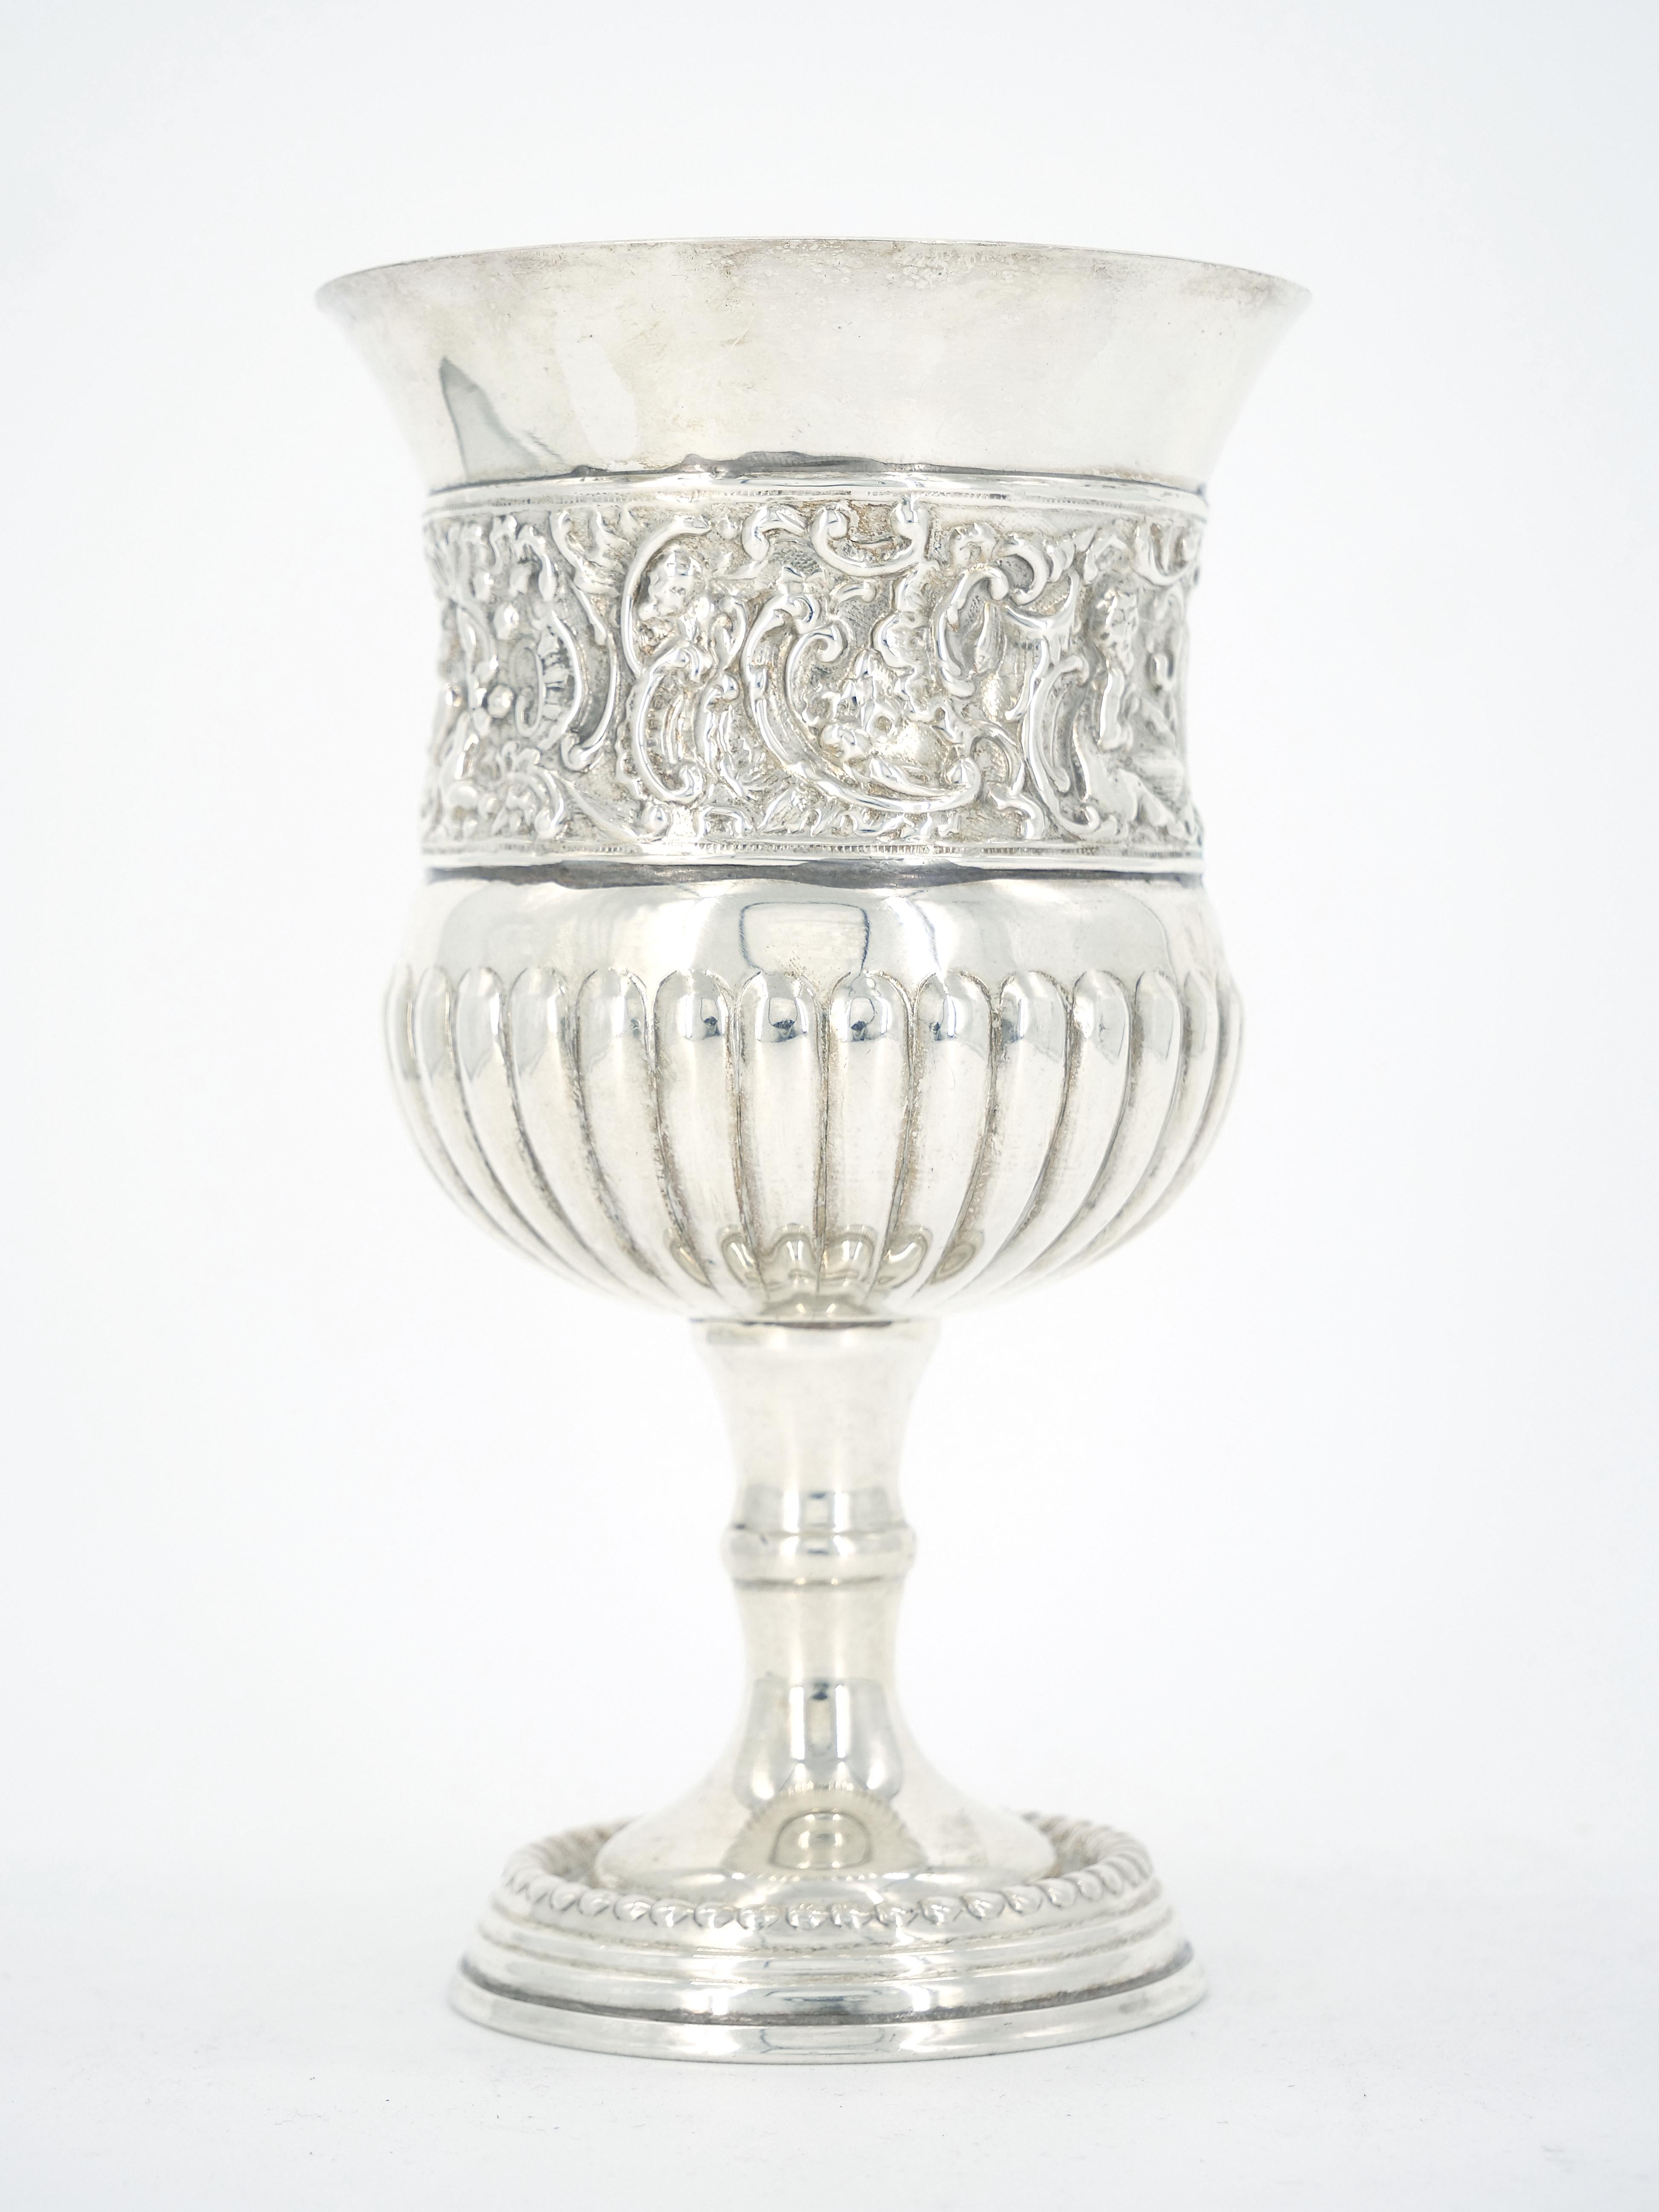 Nineteenth century silverplate wine goblet with beaded round foot, gadrooning below a pinched waist featuring an ornately chased band depicting figures, foliate and rocaille motifs, and a flared rim. Signed underneath with two starbursts. Finely